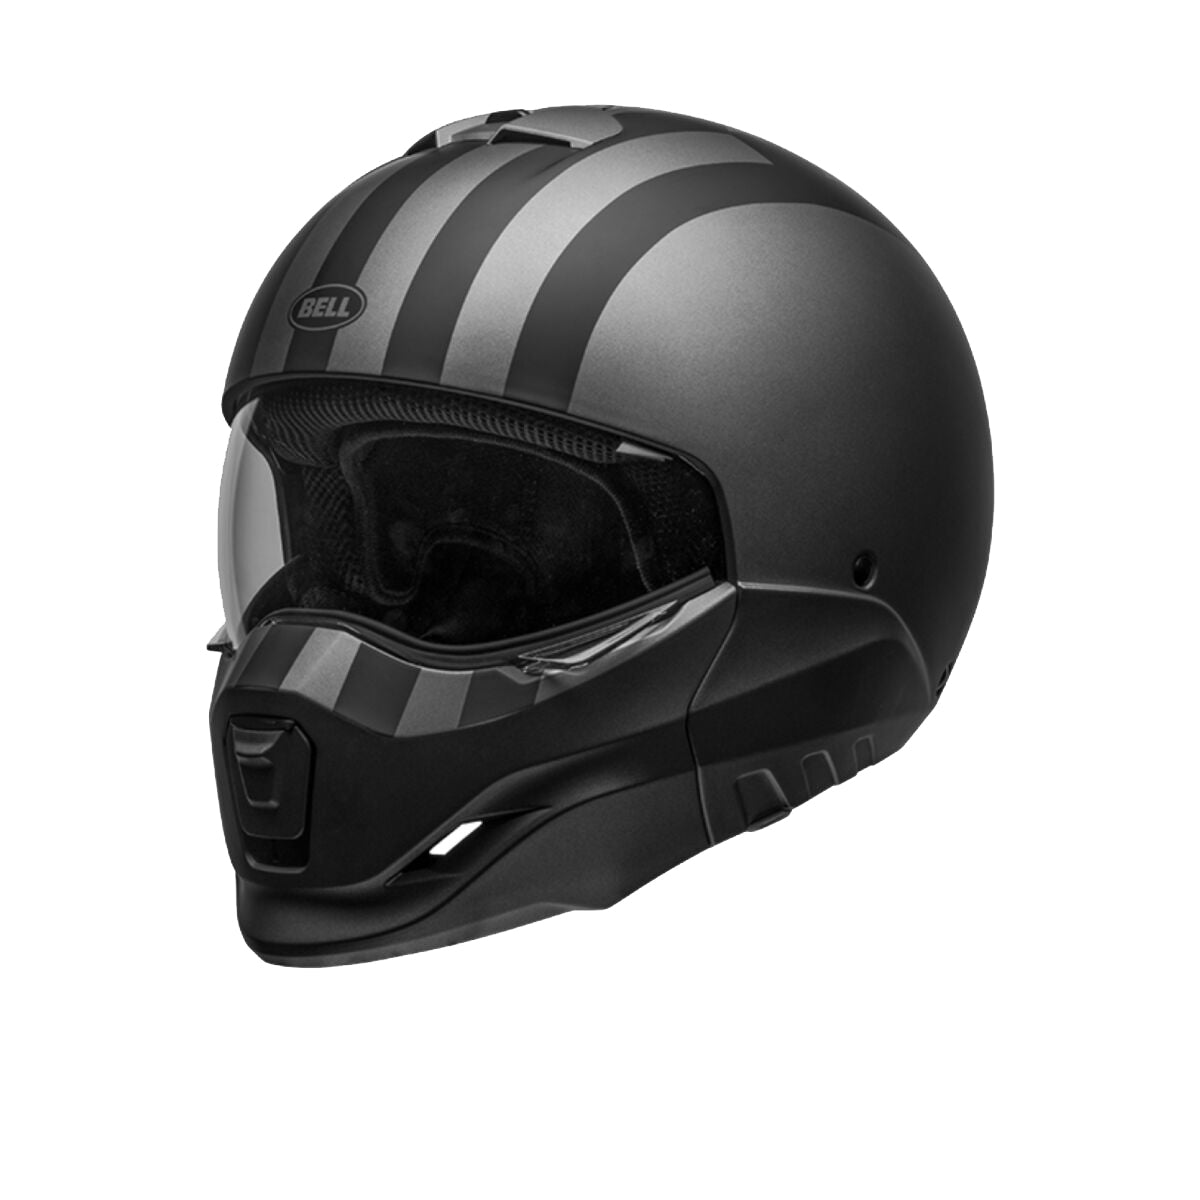 Bell Broozer ‘Full Face. Open Face. In Your Face’ 2 in 1 Motorcycle Free Ride Matte Gray and Black Helmet